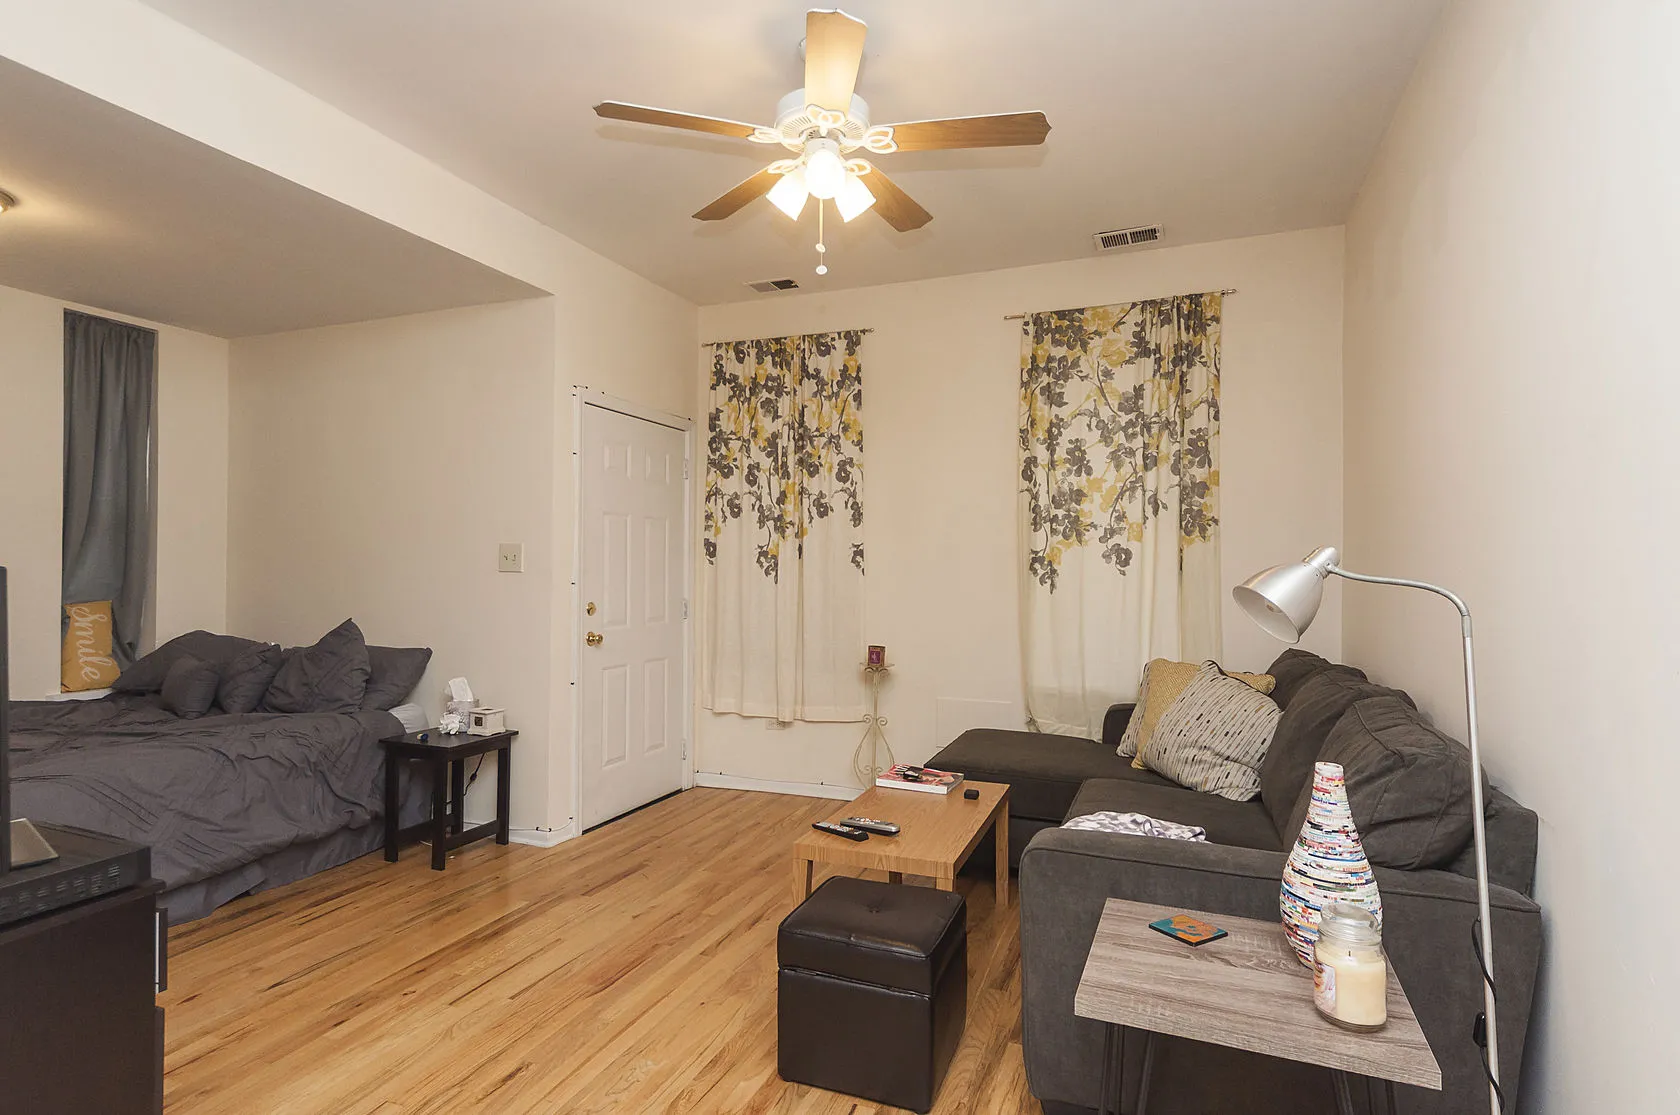 1230 N Greenview Ave, , 60642, USA 60642-unit#1F-Chicago-IL